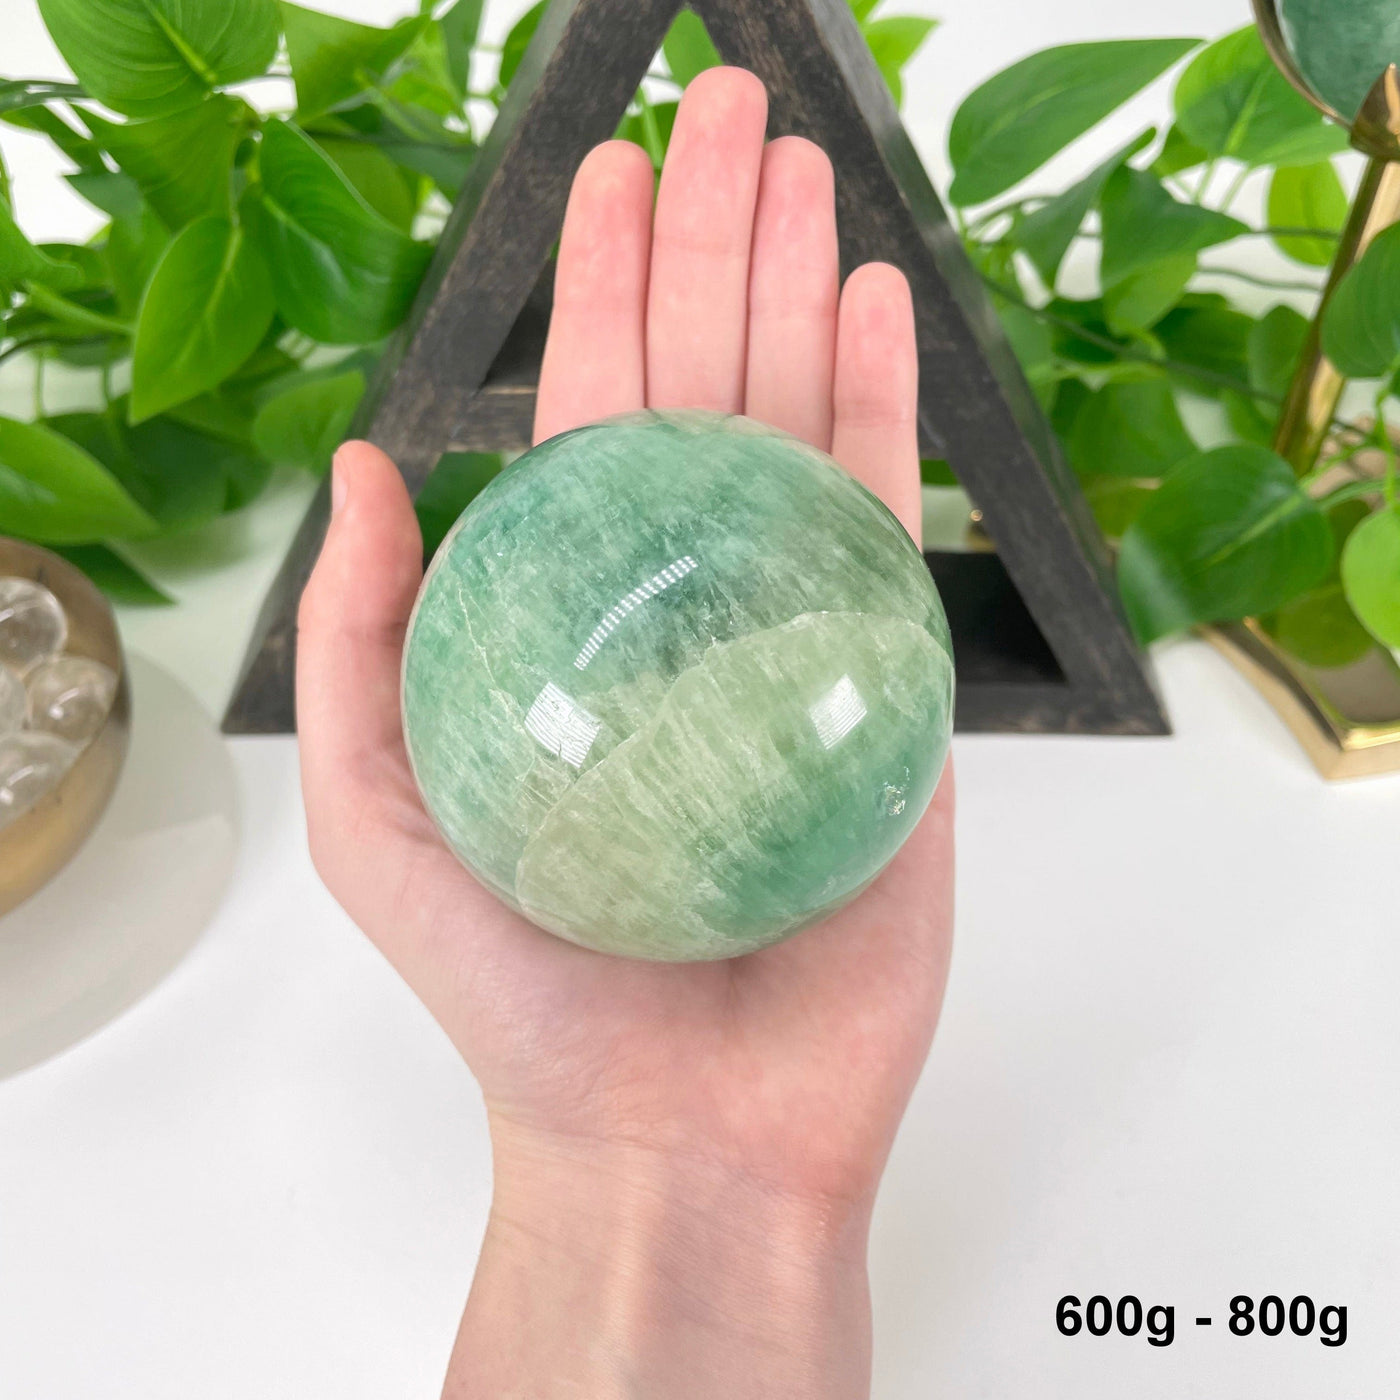 one 600g - 800g green fluorite sphere in hand for size reference